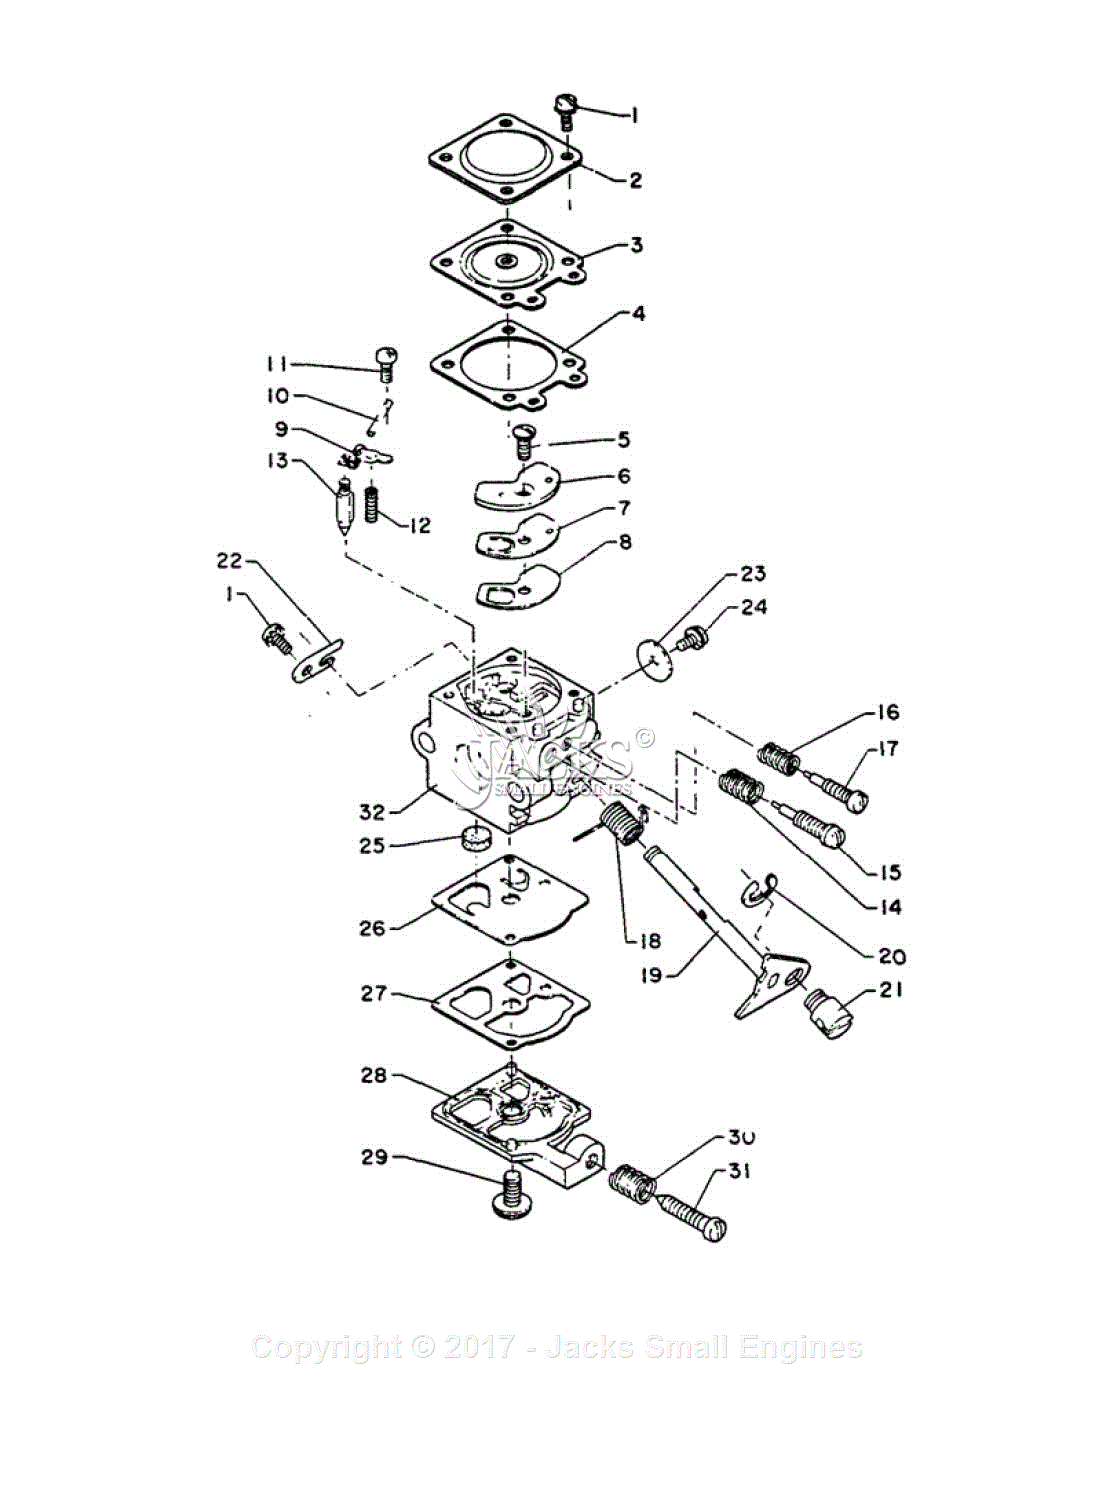 Writer use stand out Echo SRM-200 Parts Diagram for Carburetor